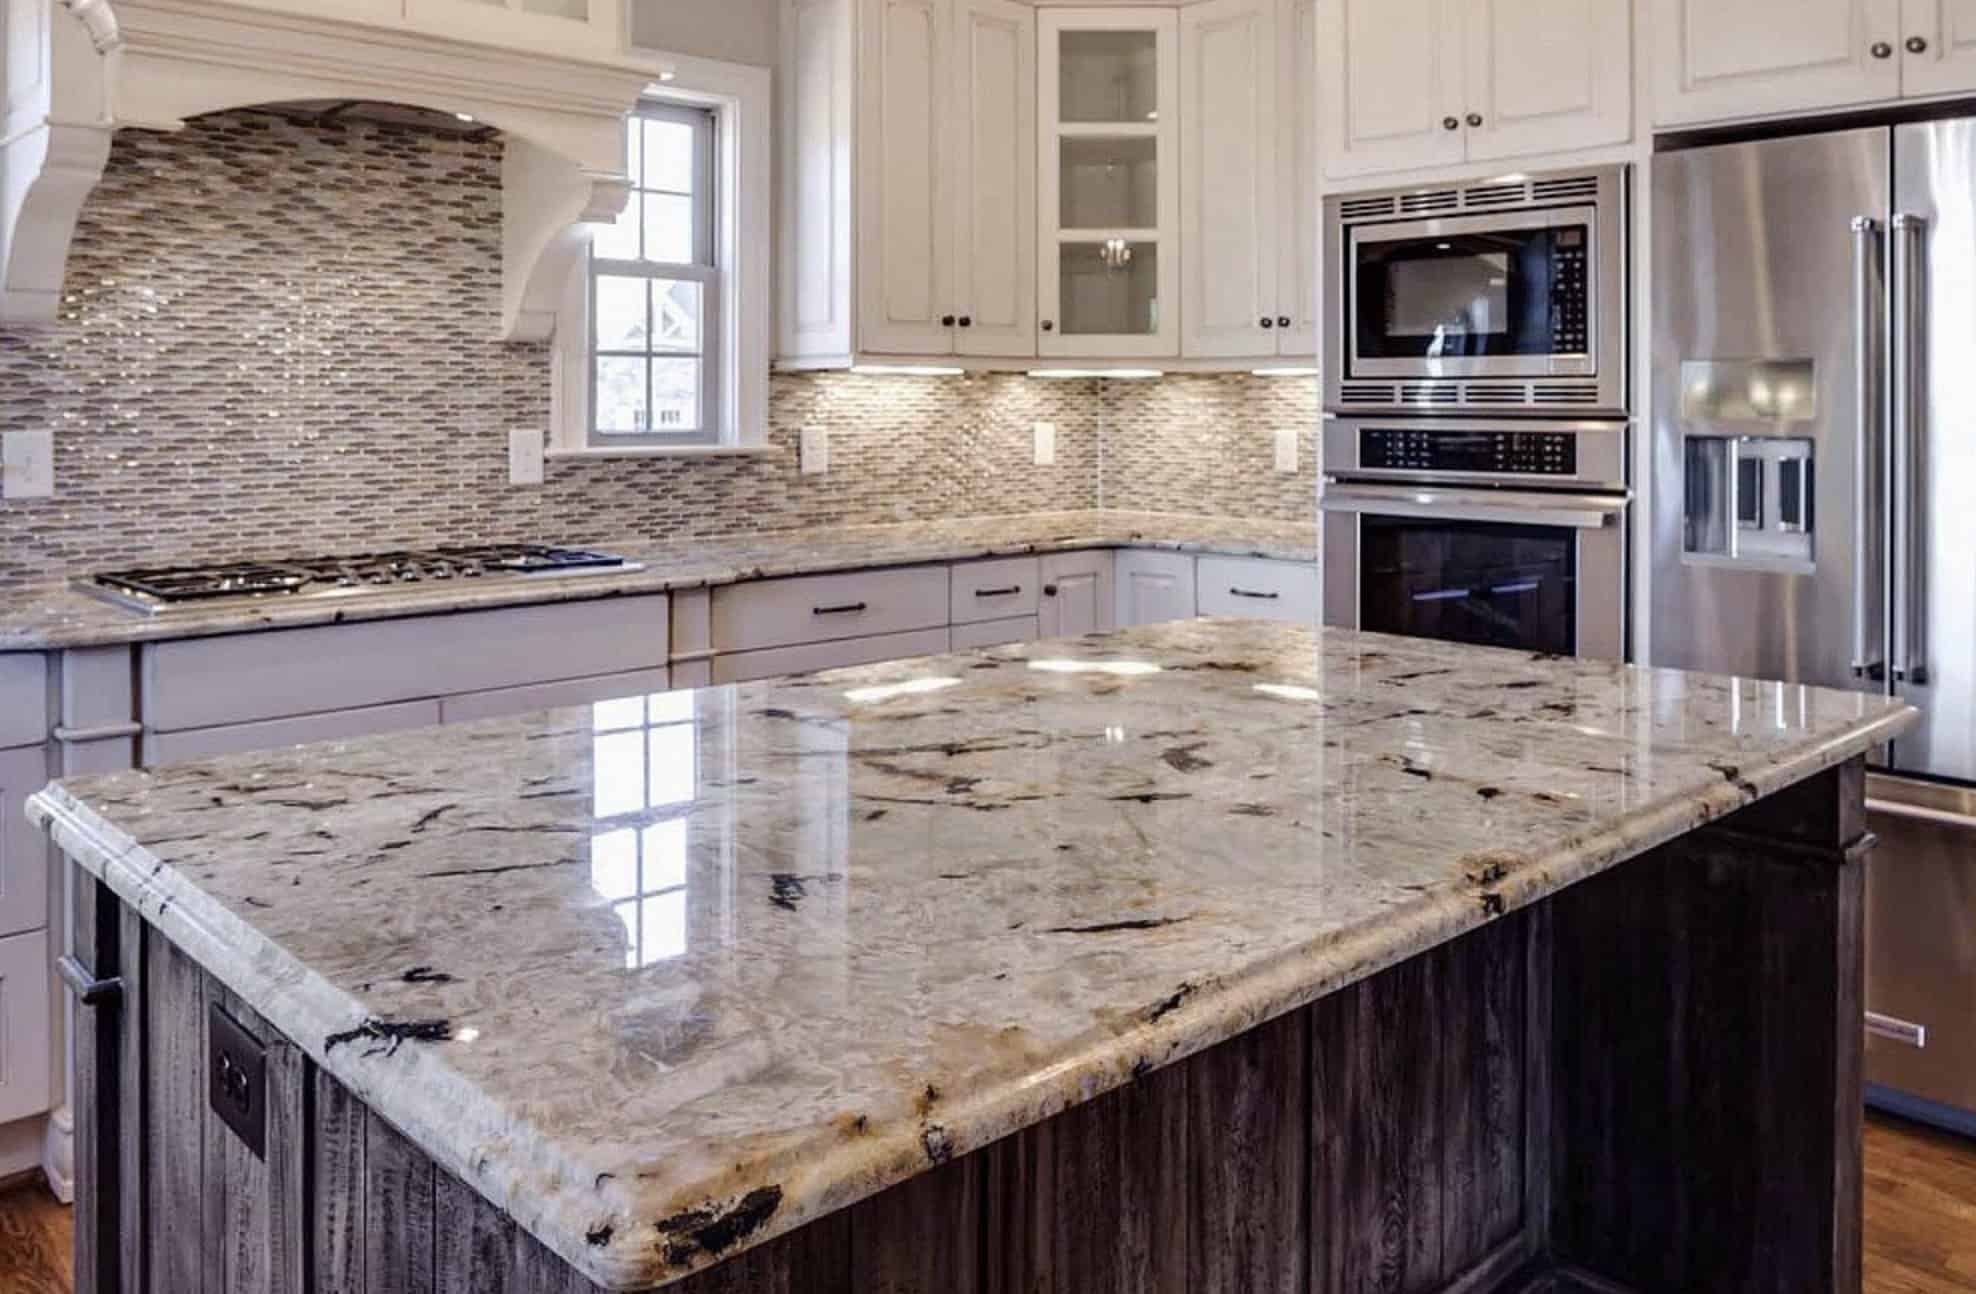 Common Granite Countertops Problems and How to Avoid Them